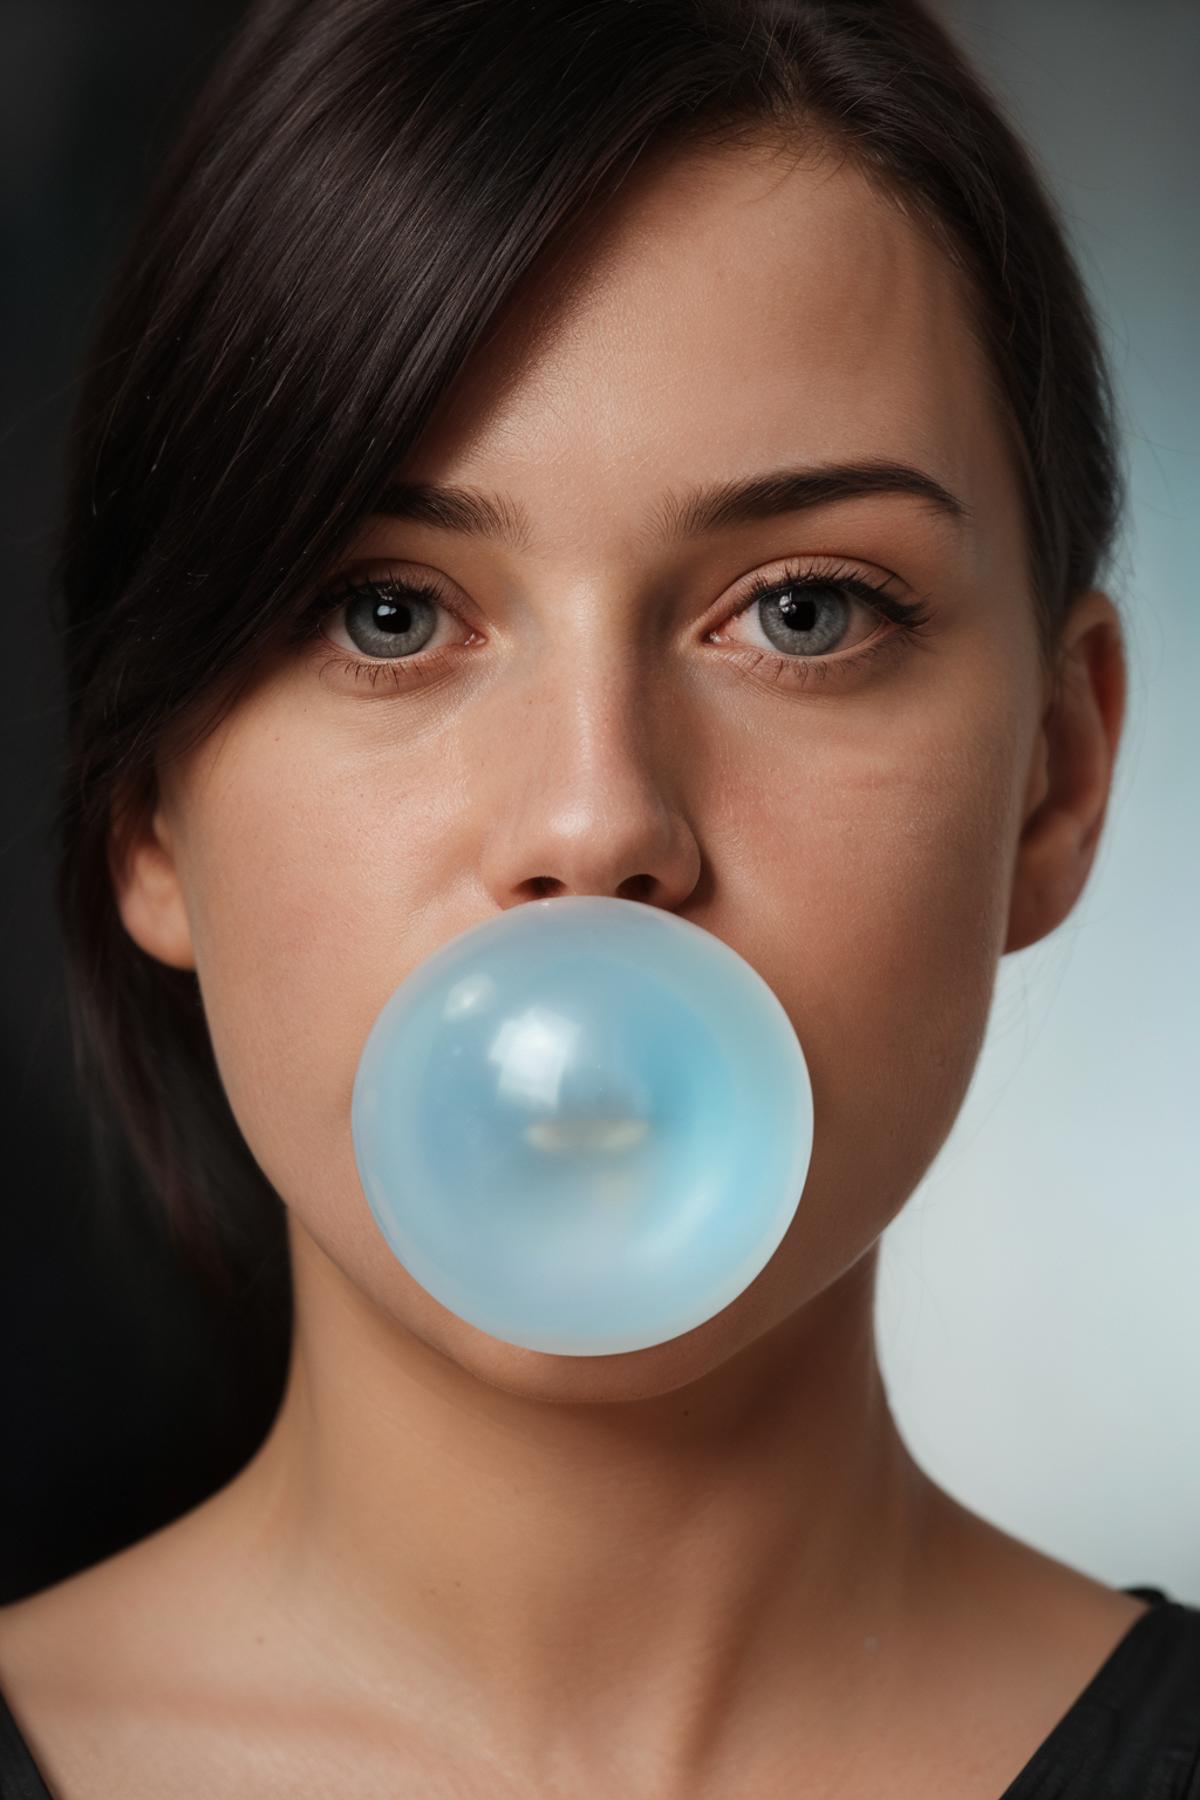 A woman wearing a blue top with a blue bubble gum bubble in her mouth.